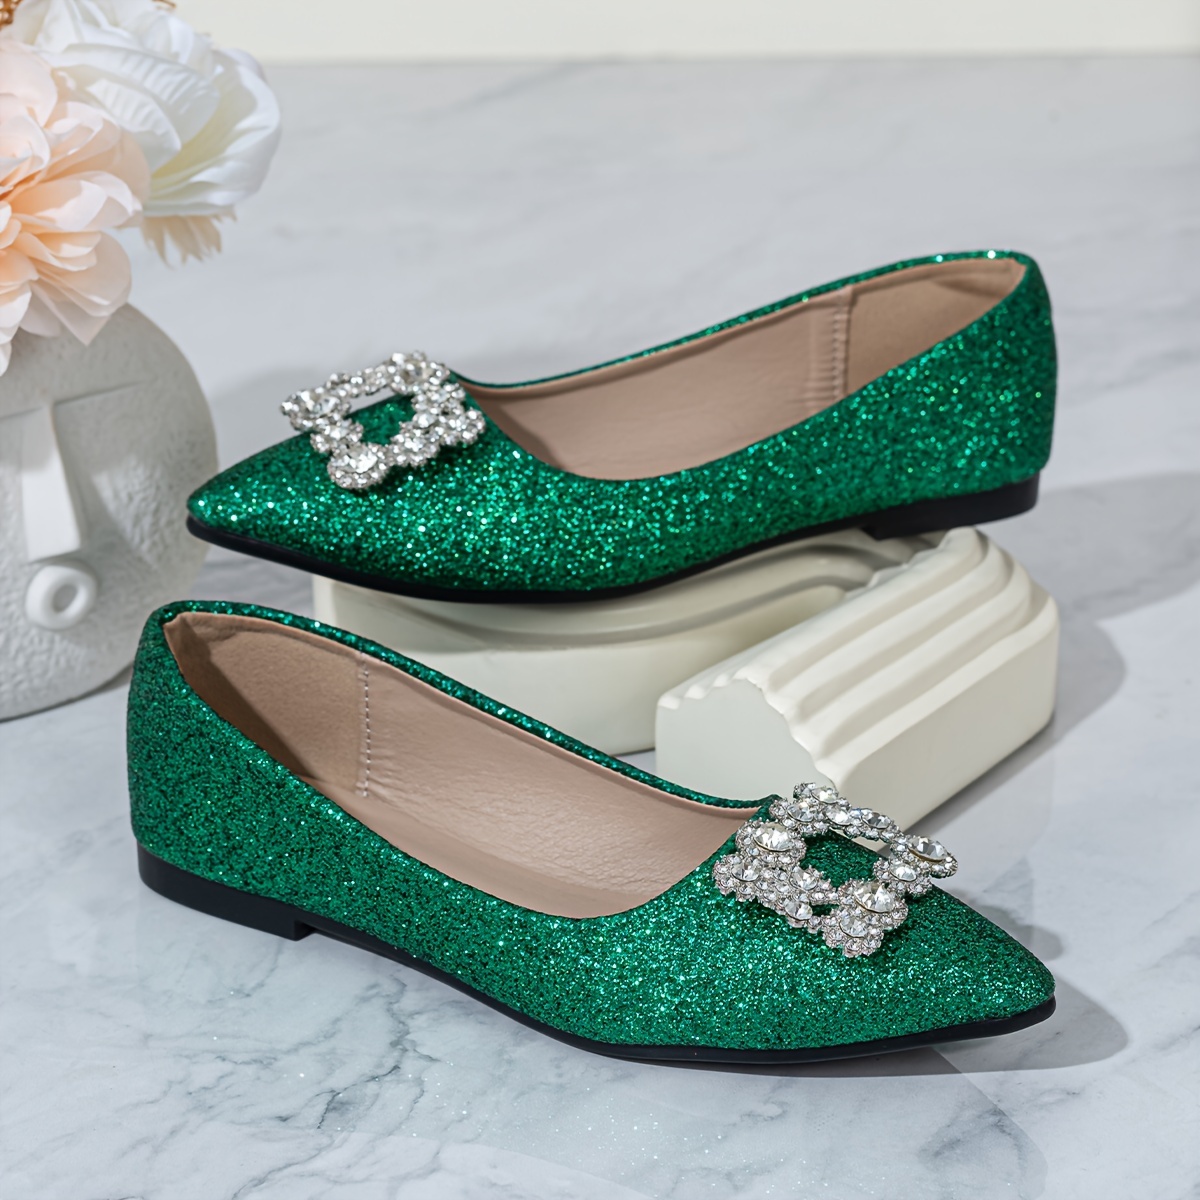 

Women's Rhinestone Buckle Flat Shoes, Fashion Sequins Pointed Toe Banquet Shoes, Slip On Evening Dress Flats For Music Festival